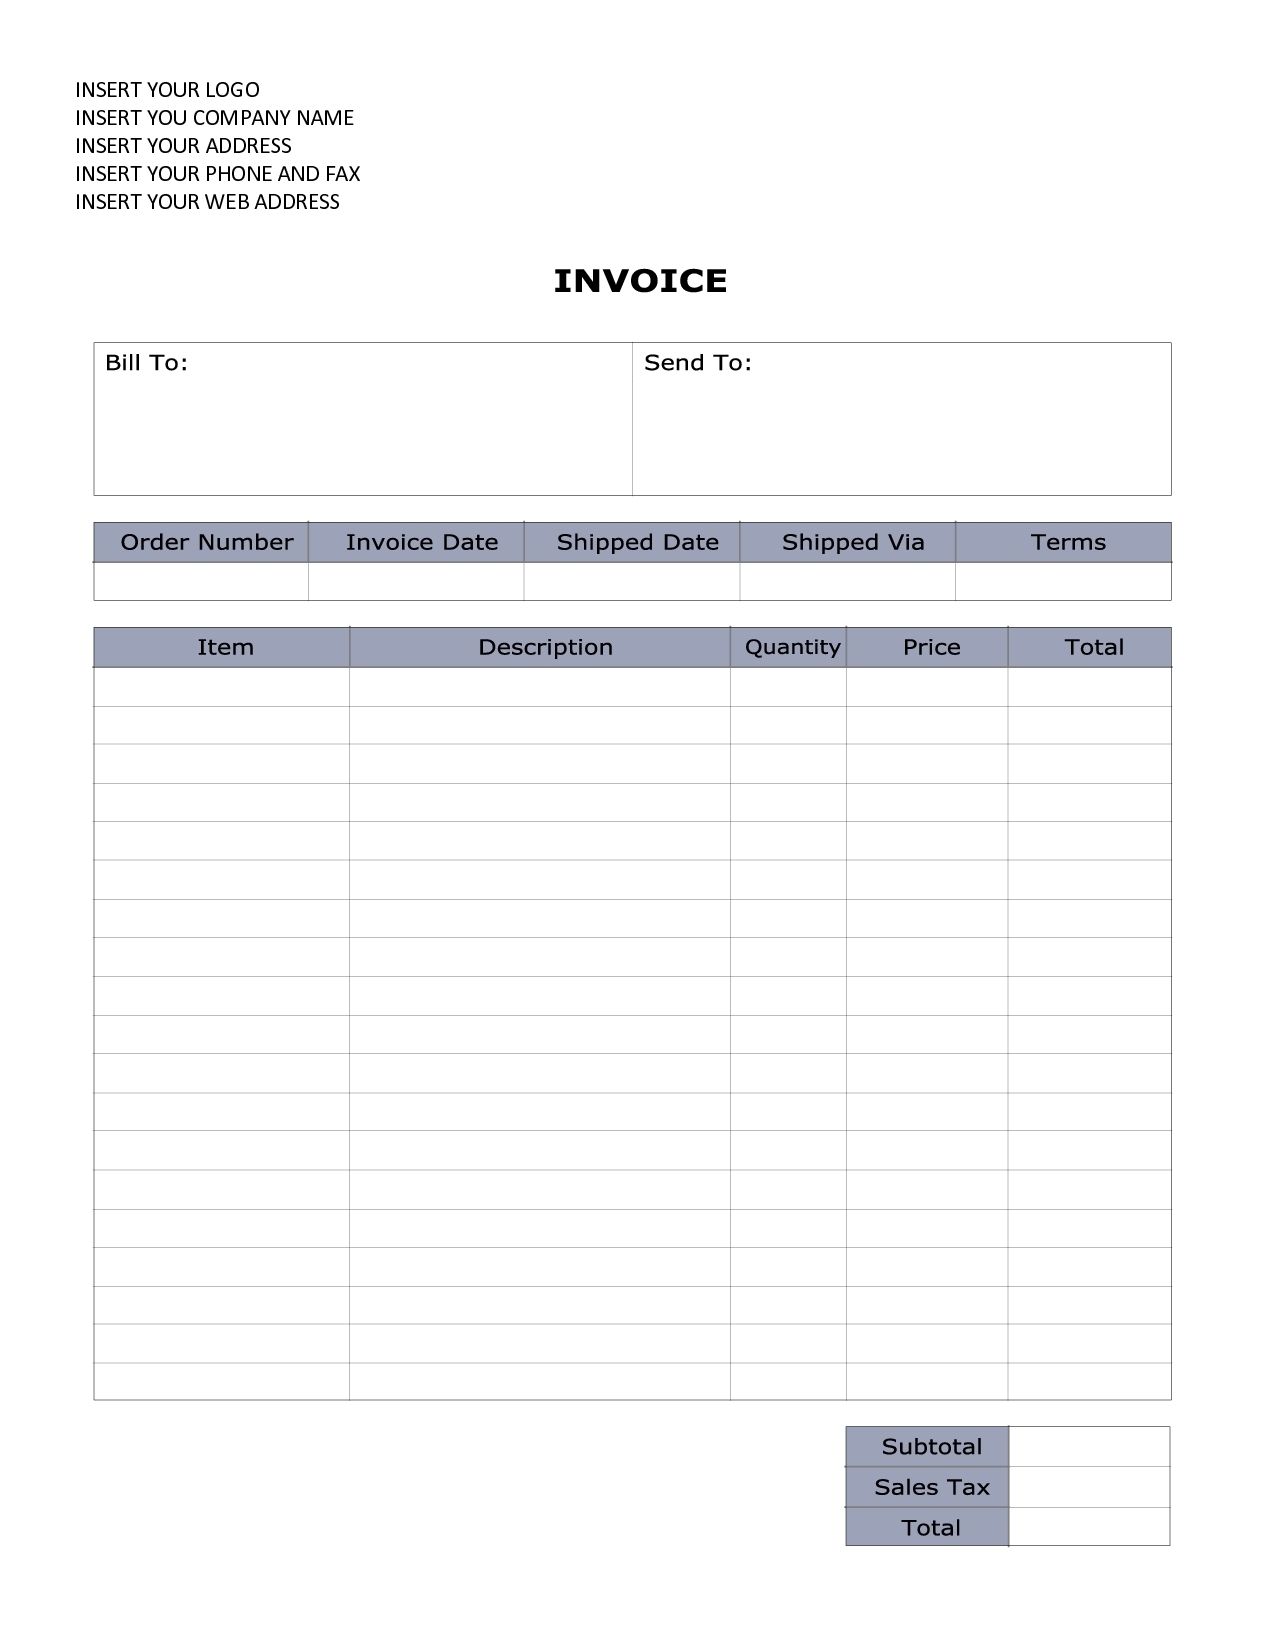 simple invoice template word basic invoice format word design invoice template 1275 X 1650